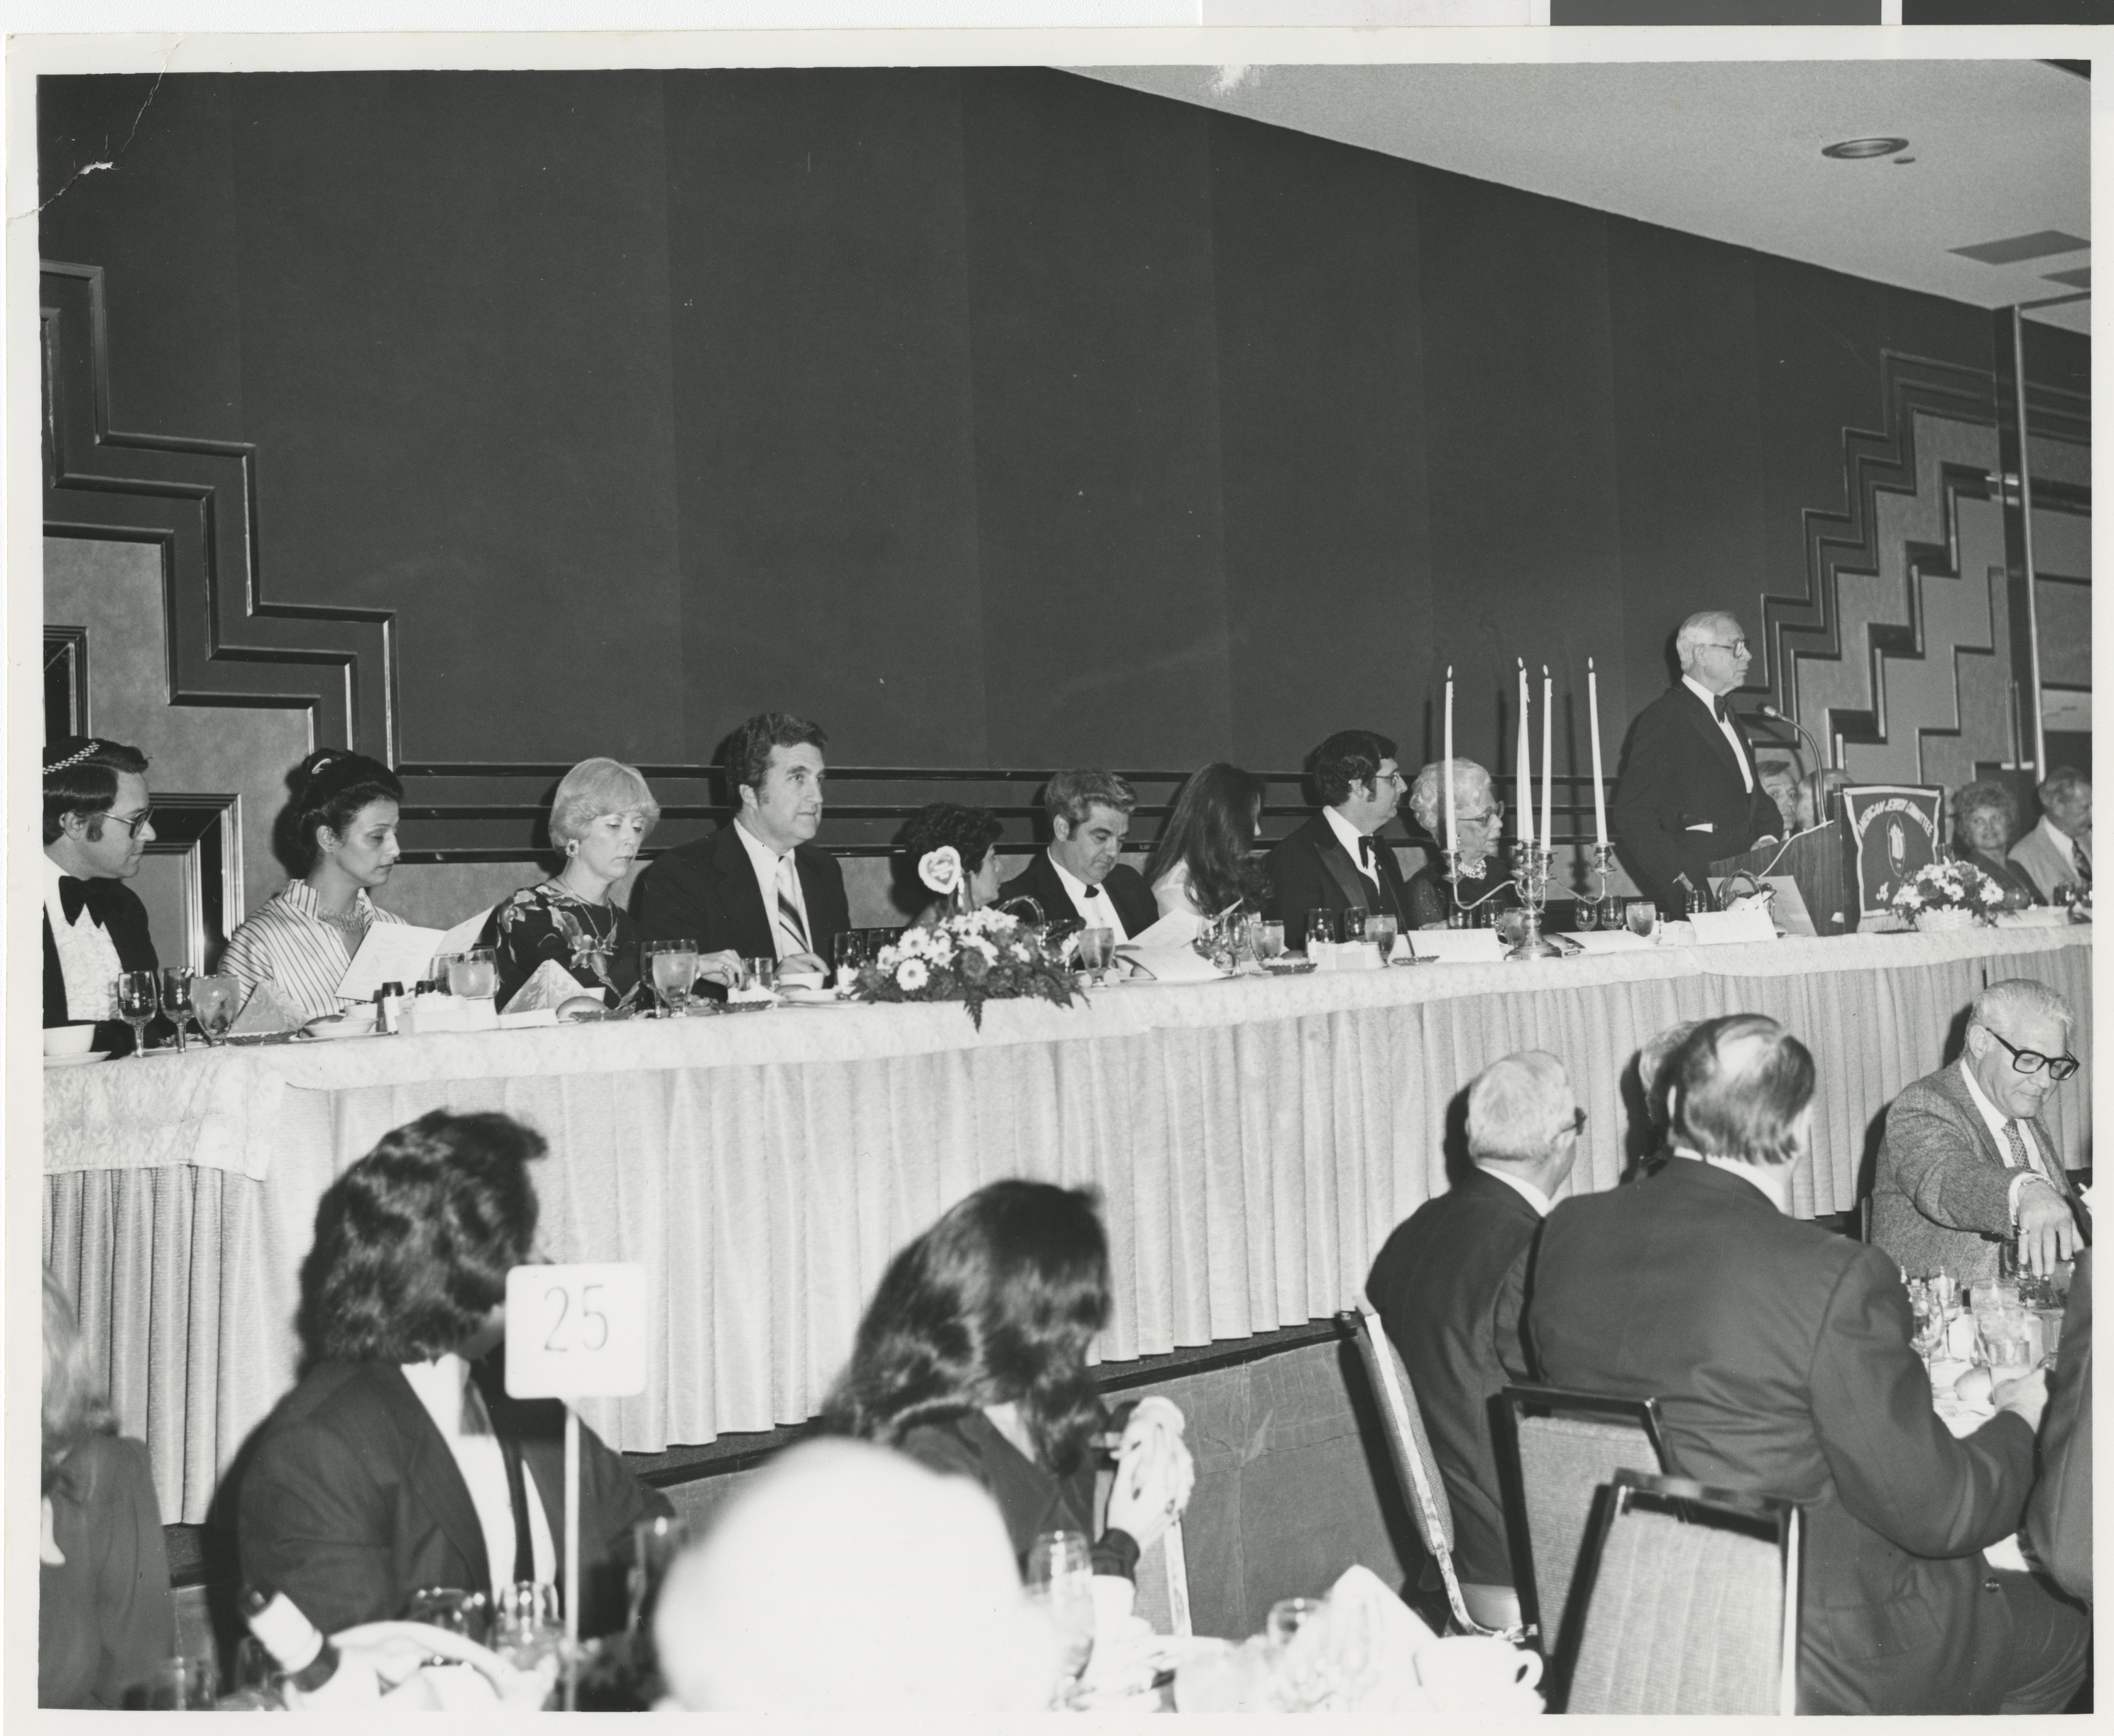 Photograph of an event for the American Jewish Committee